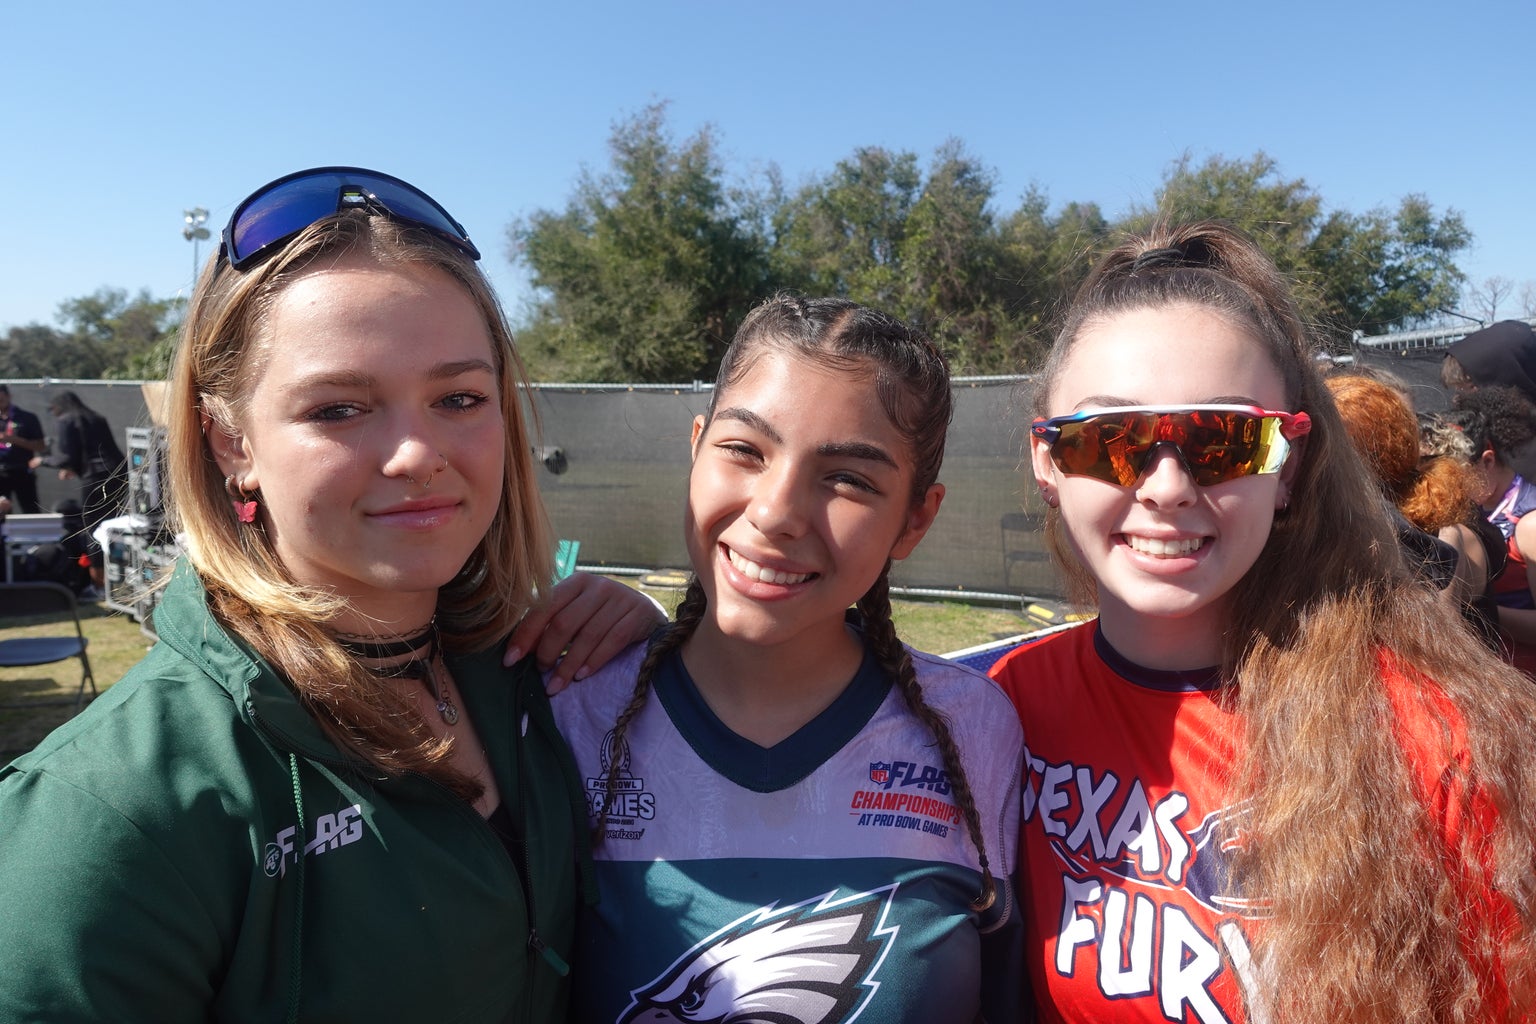 A photo of 3 17u girls flag football players. From left to right a blonde with a green sweater, a brunette with braids and an eagles jersey and a brunette with sunglasses and a red \